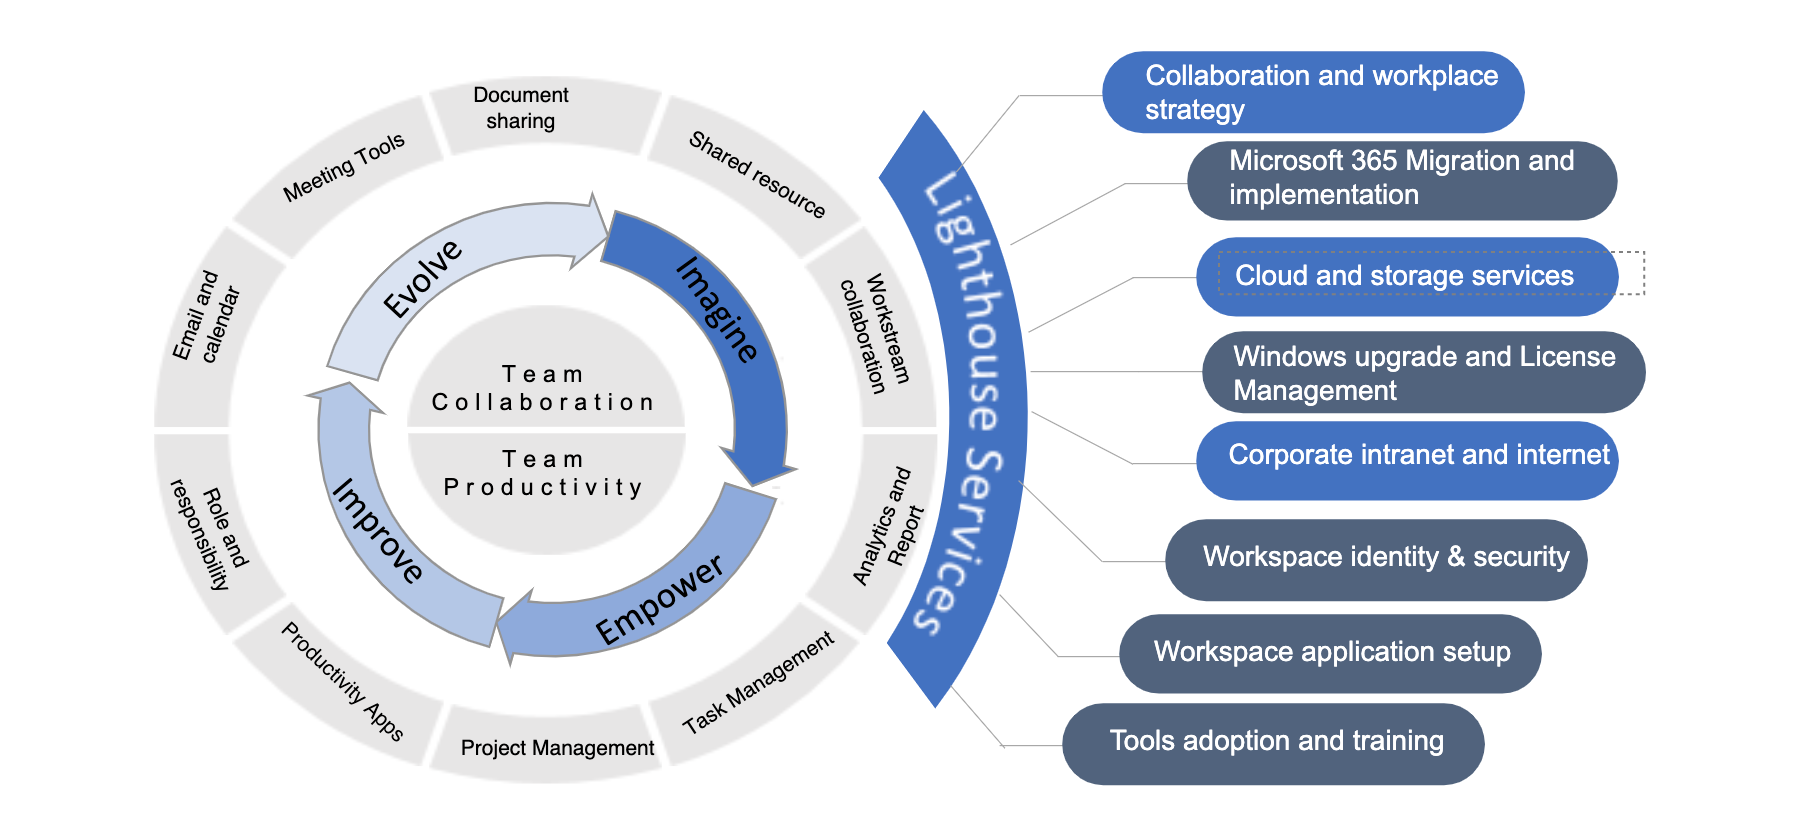 Lighthouse's collaboration and digital workplace model